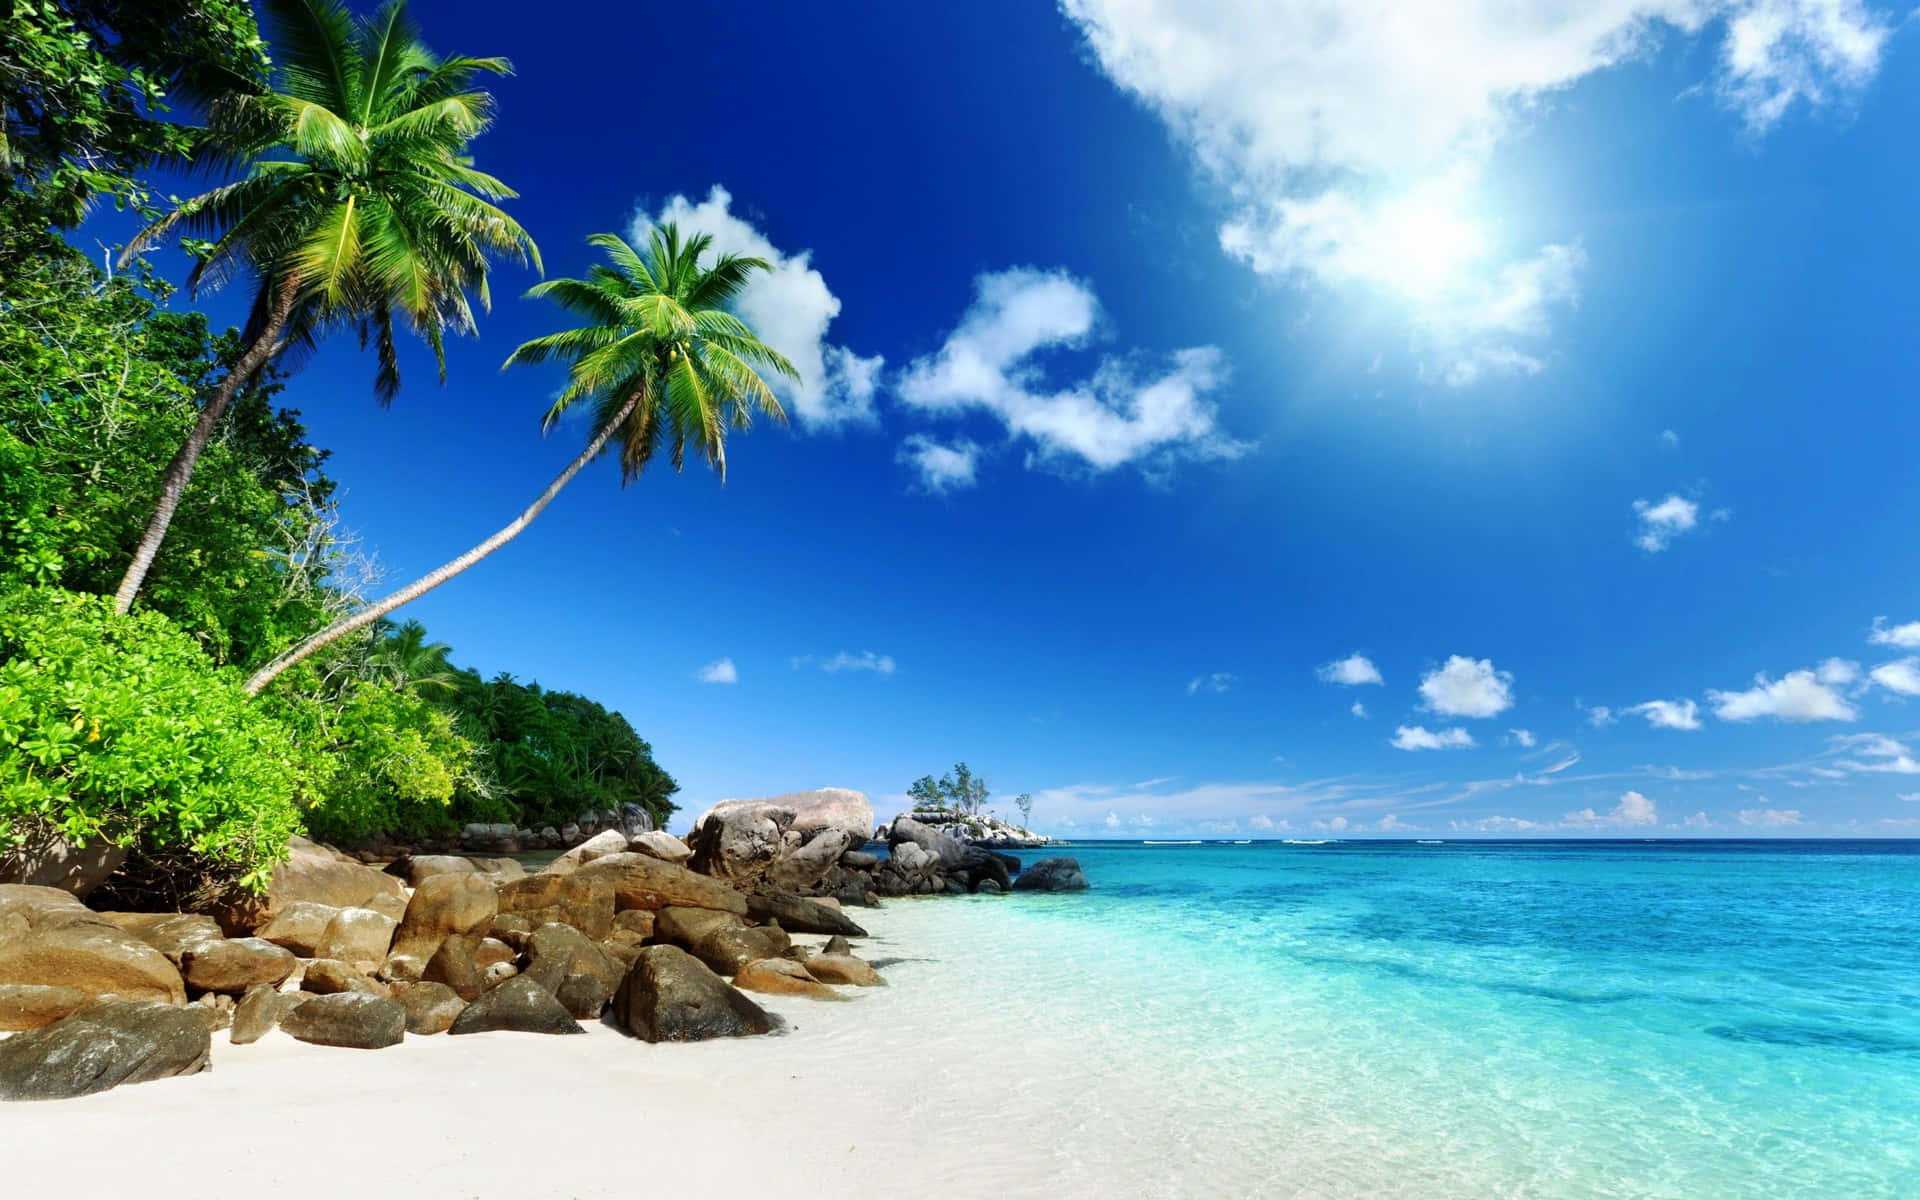 "Let's Go Somewhere Exotic: A Tropical Island Vacation" Wallpaper